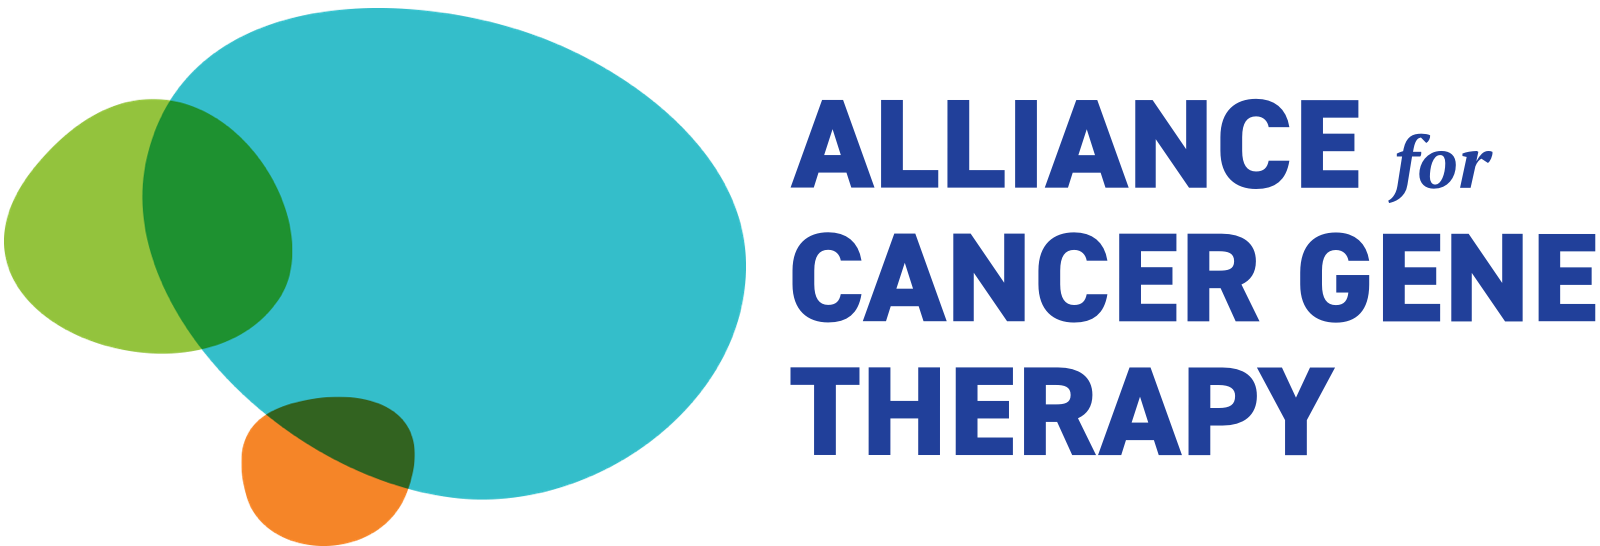 Alliance for Cancer Gene Therapy